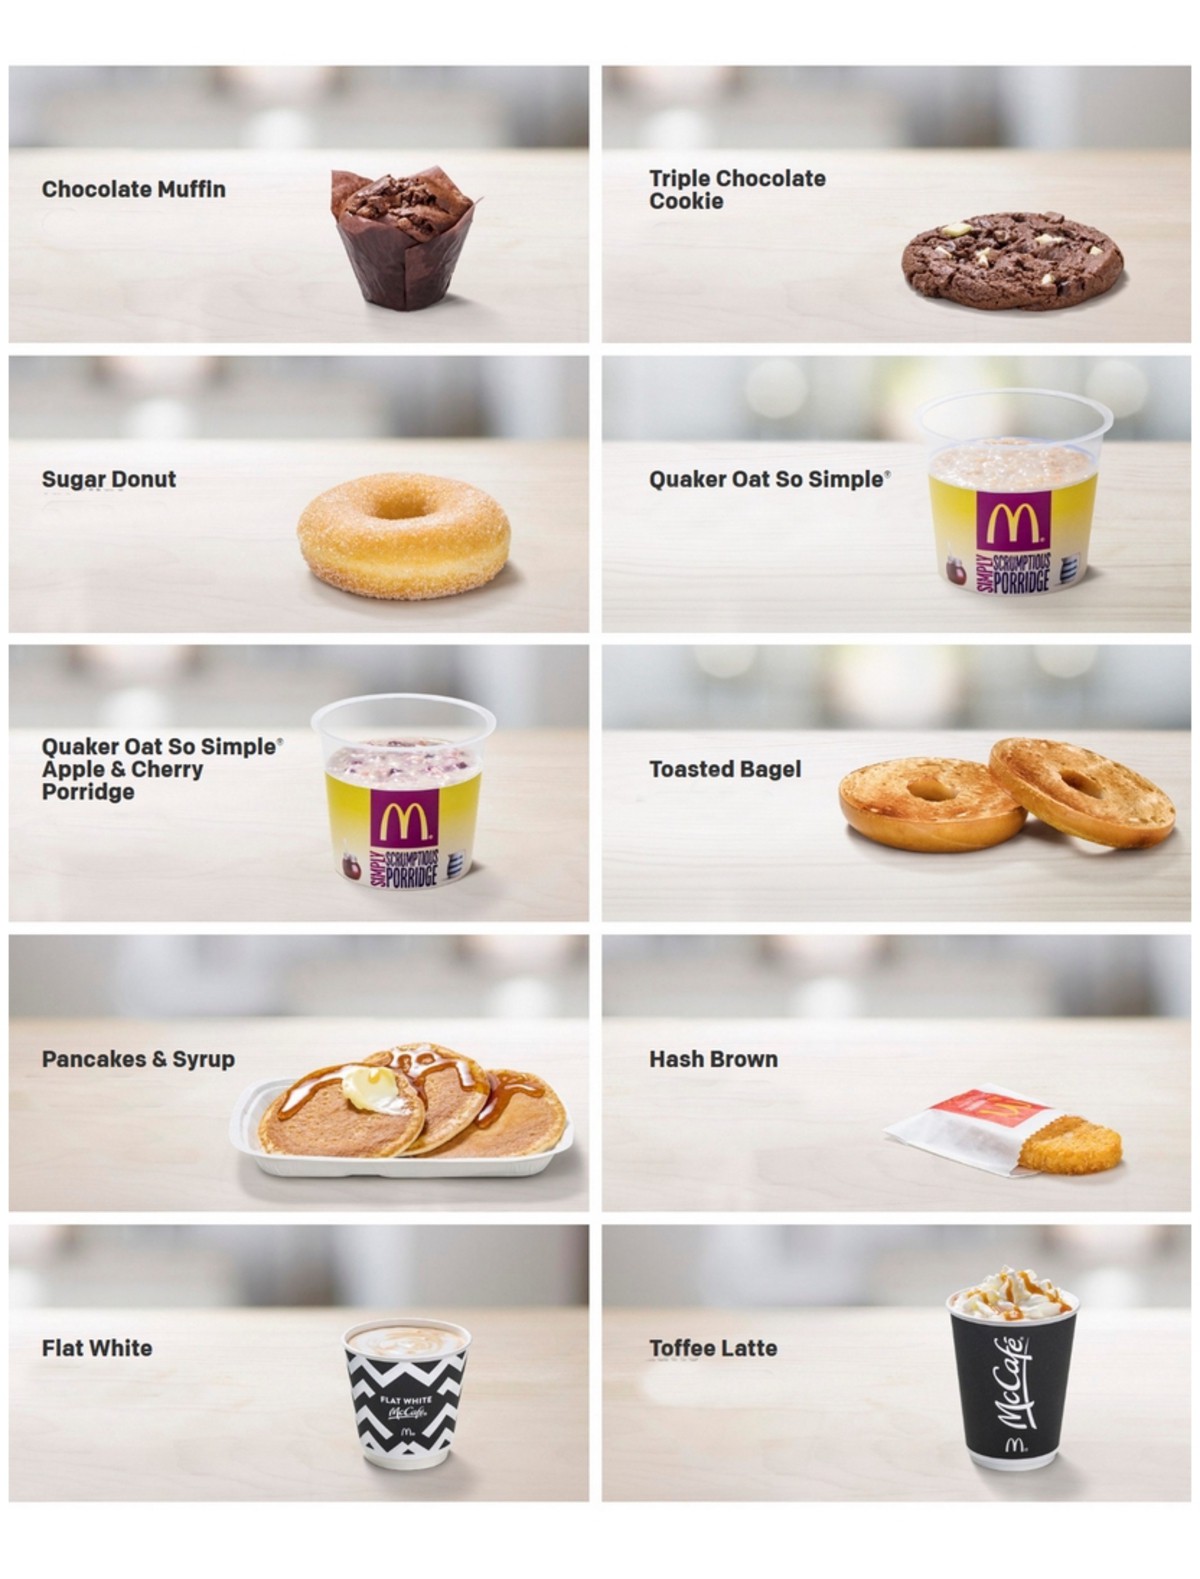 McDonald's Vegetarian Offers from 1 April